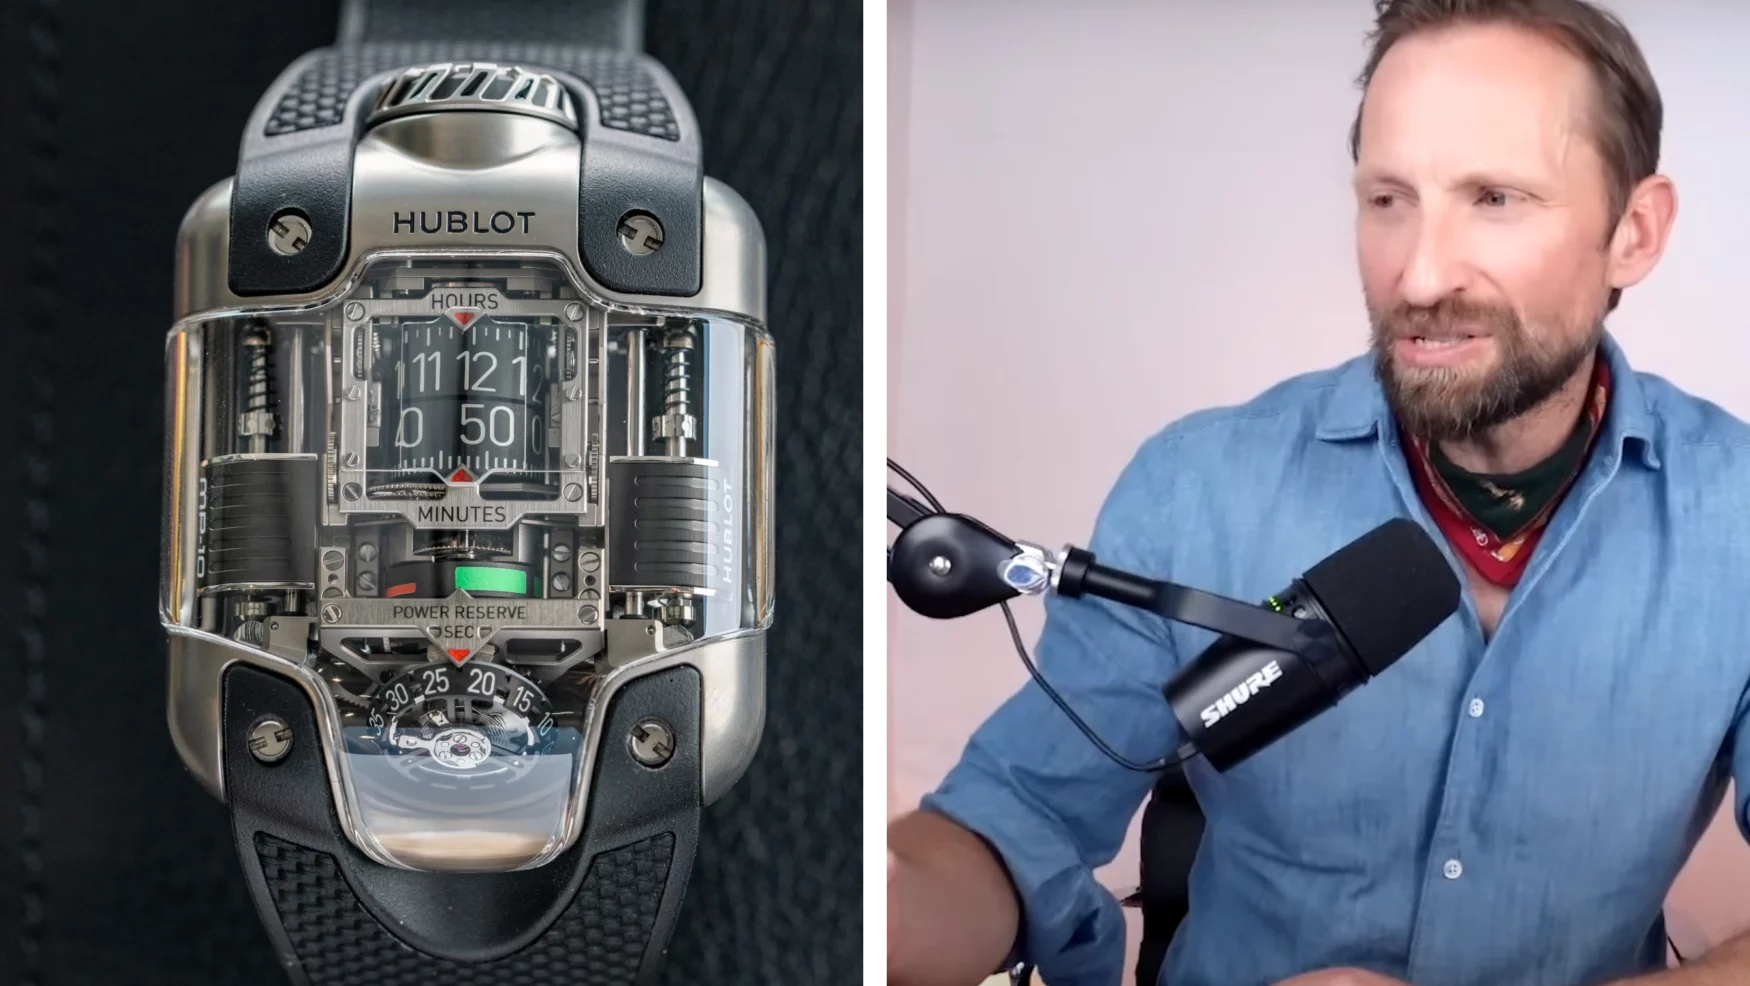 Andrew explains Hublot’s price positioning on a recent podcast, and it makes perfect sense